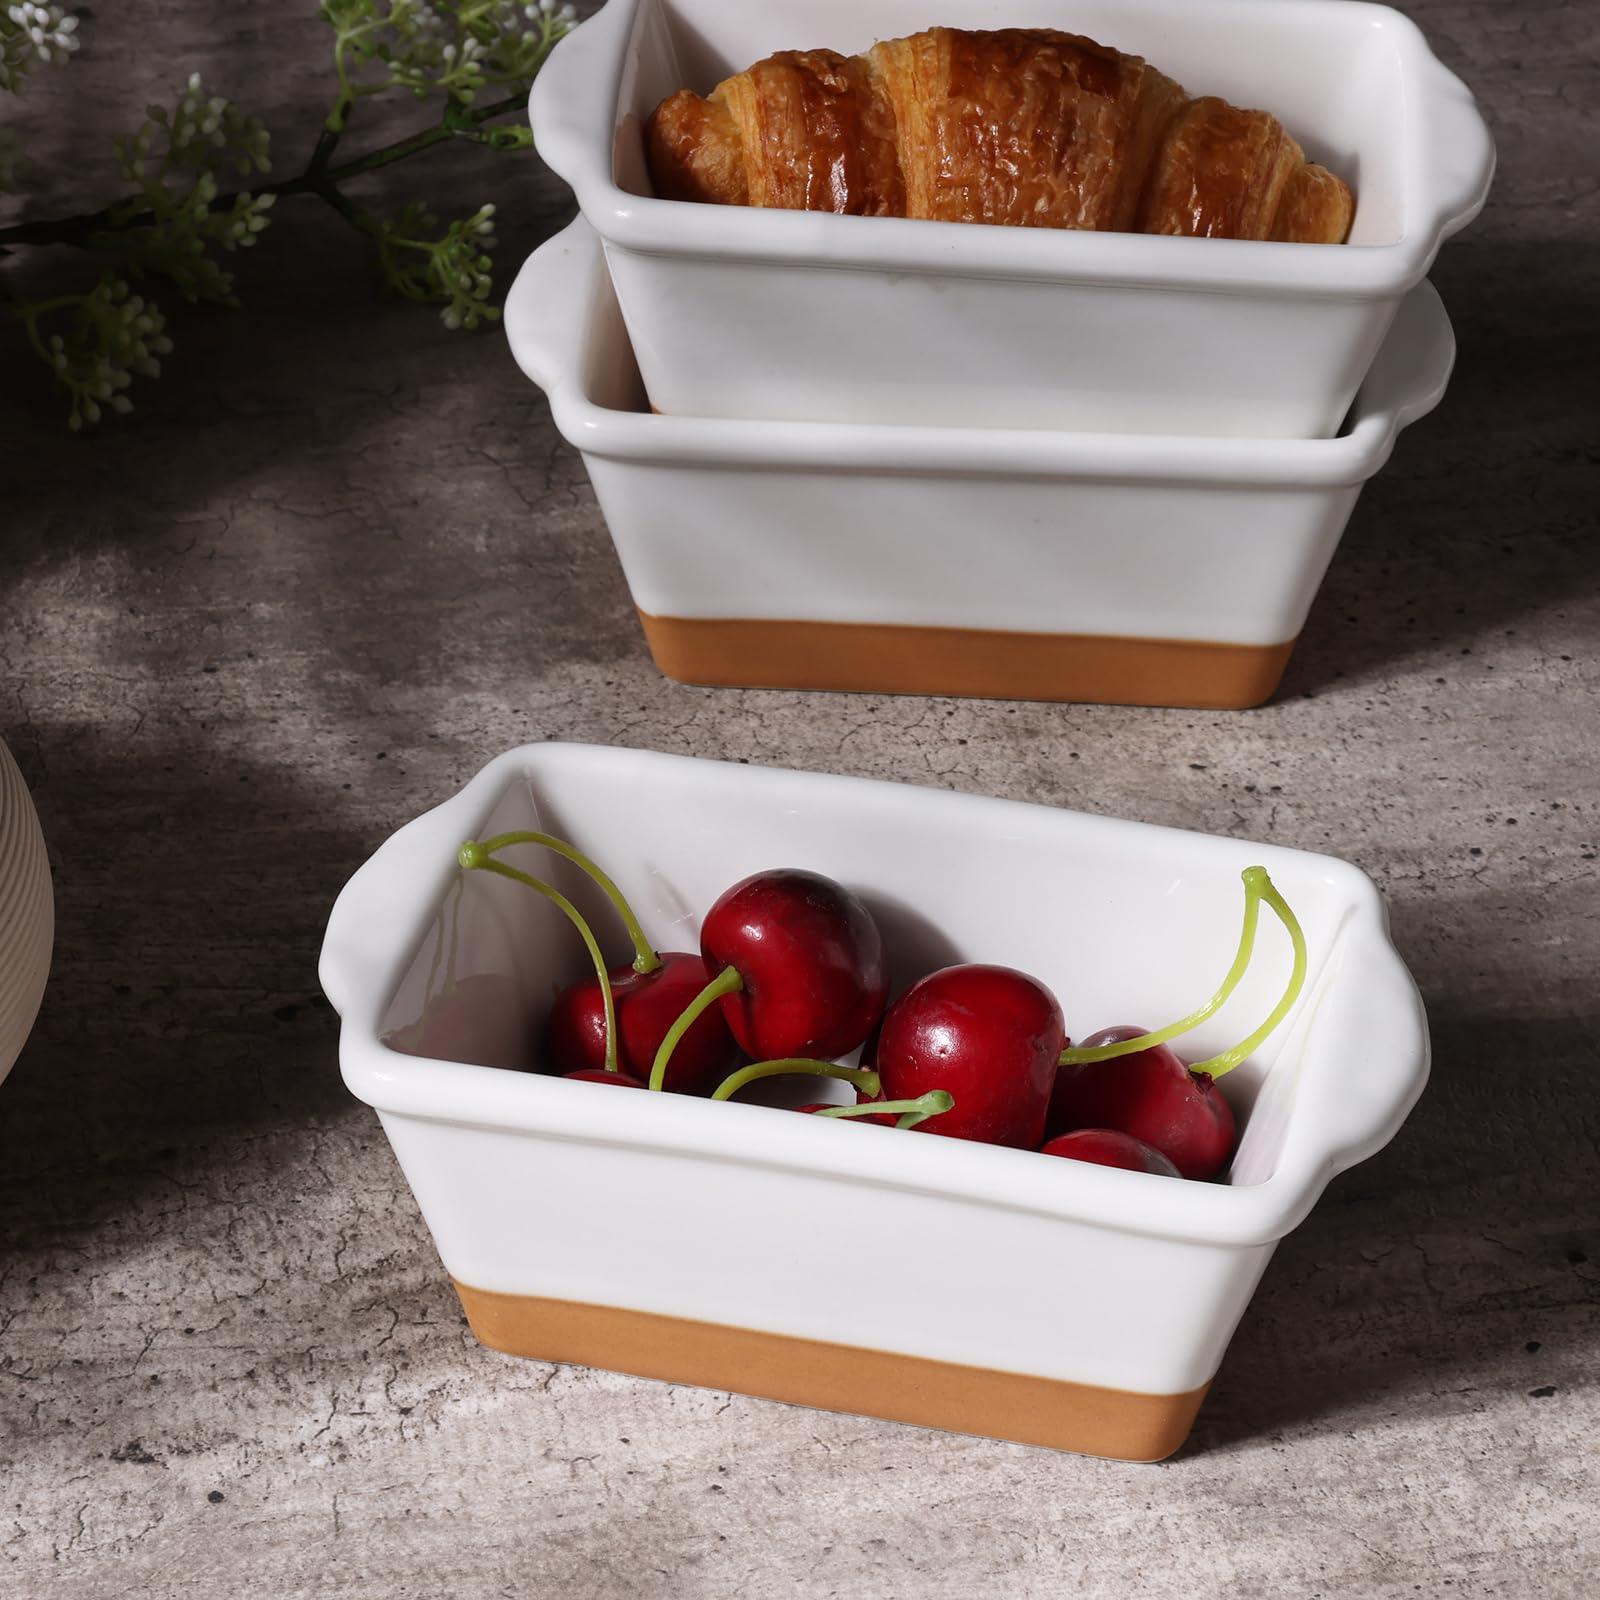 GDCZ Mini Ceramics Loaf Pan Set, Set of 4 Individual Stackable Baking Bread Pan, Multifunctional Loaf Pan for Kitchen Non-Stick, 6.2-Inch - CookCave